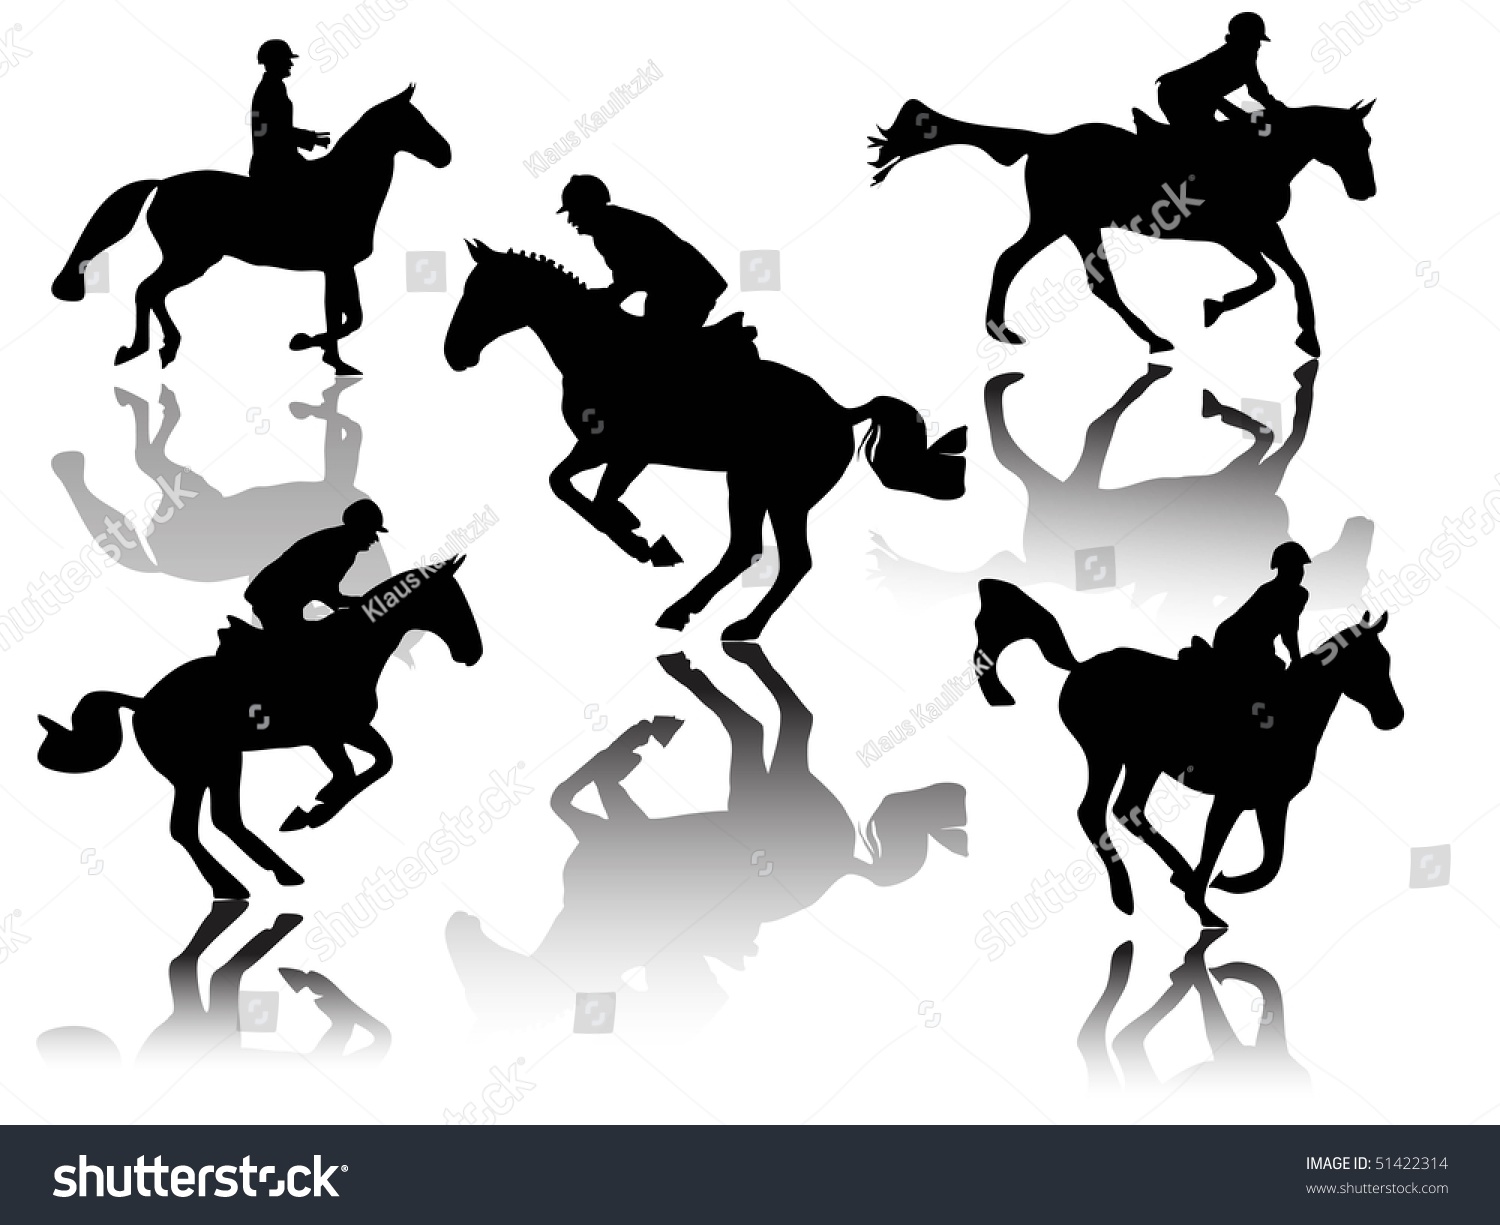 show jumping clipart - photo #36